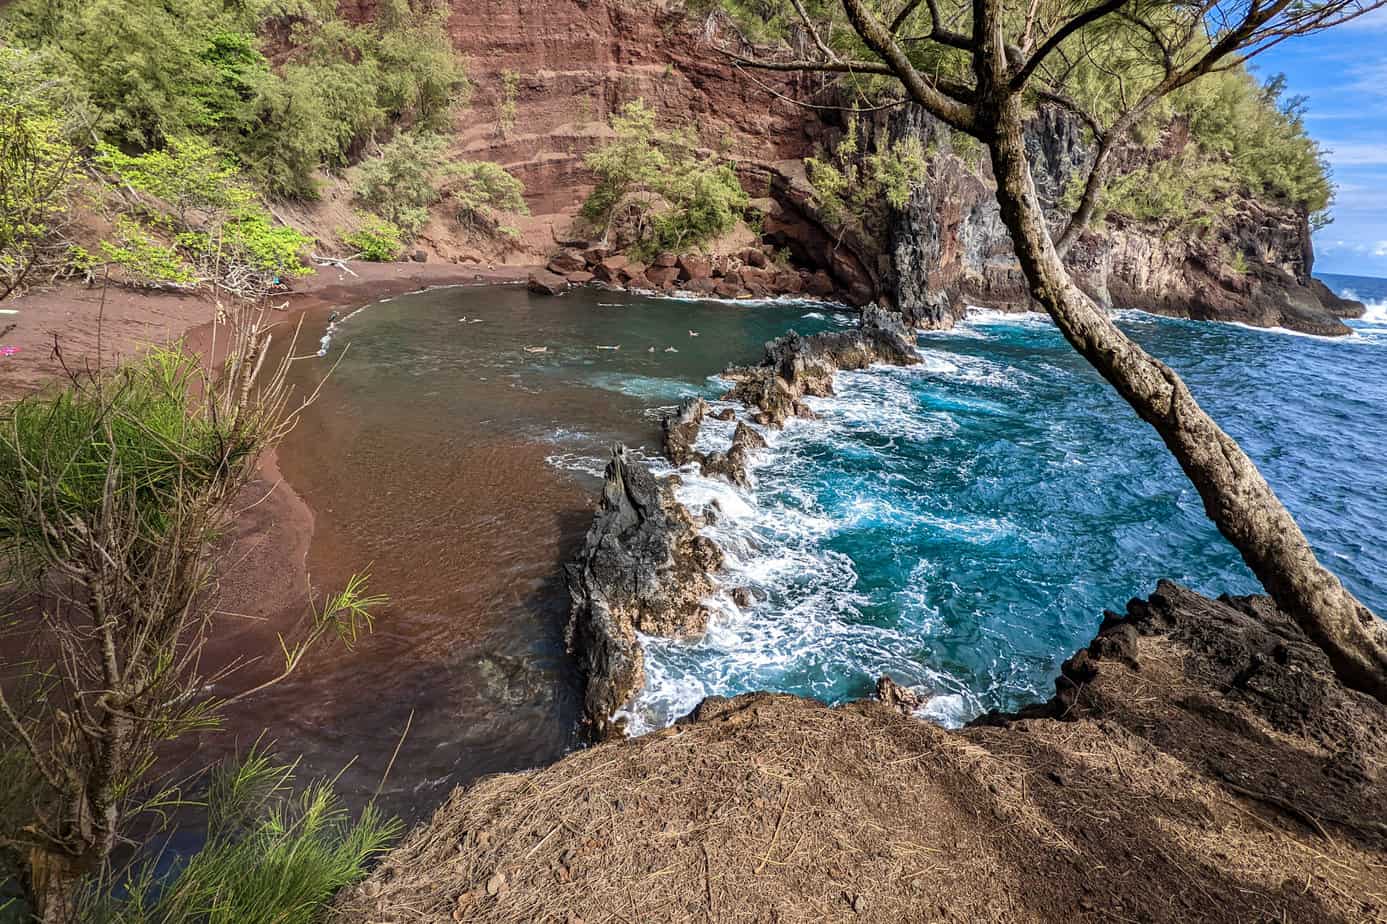 Red sand beach in a cove, protected by black lava rock, blue waves crashing on the protective barrier